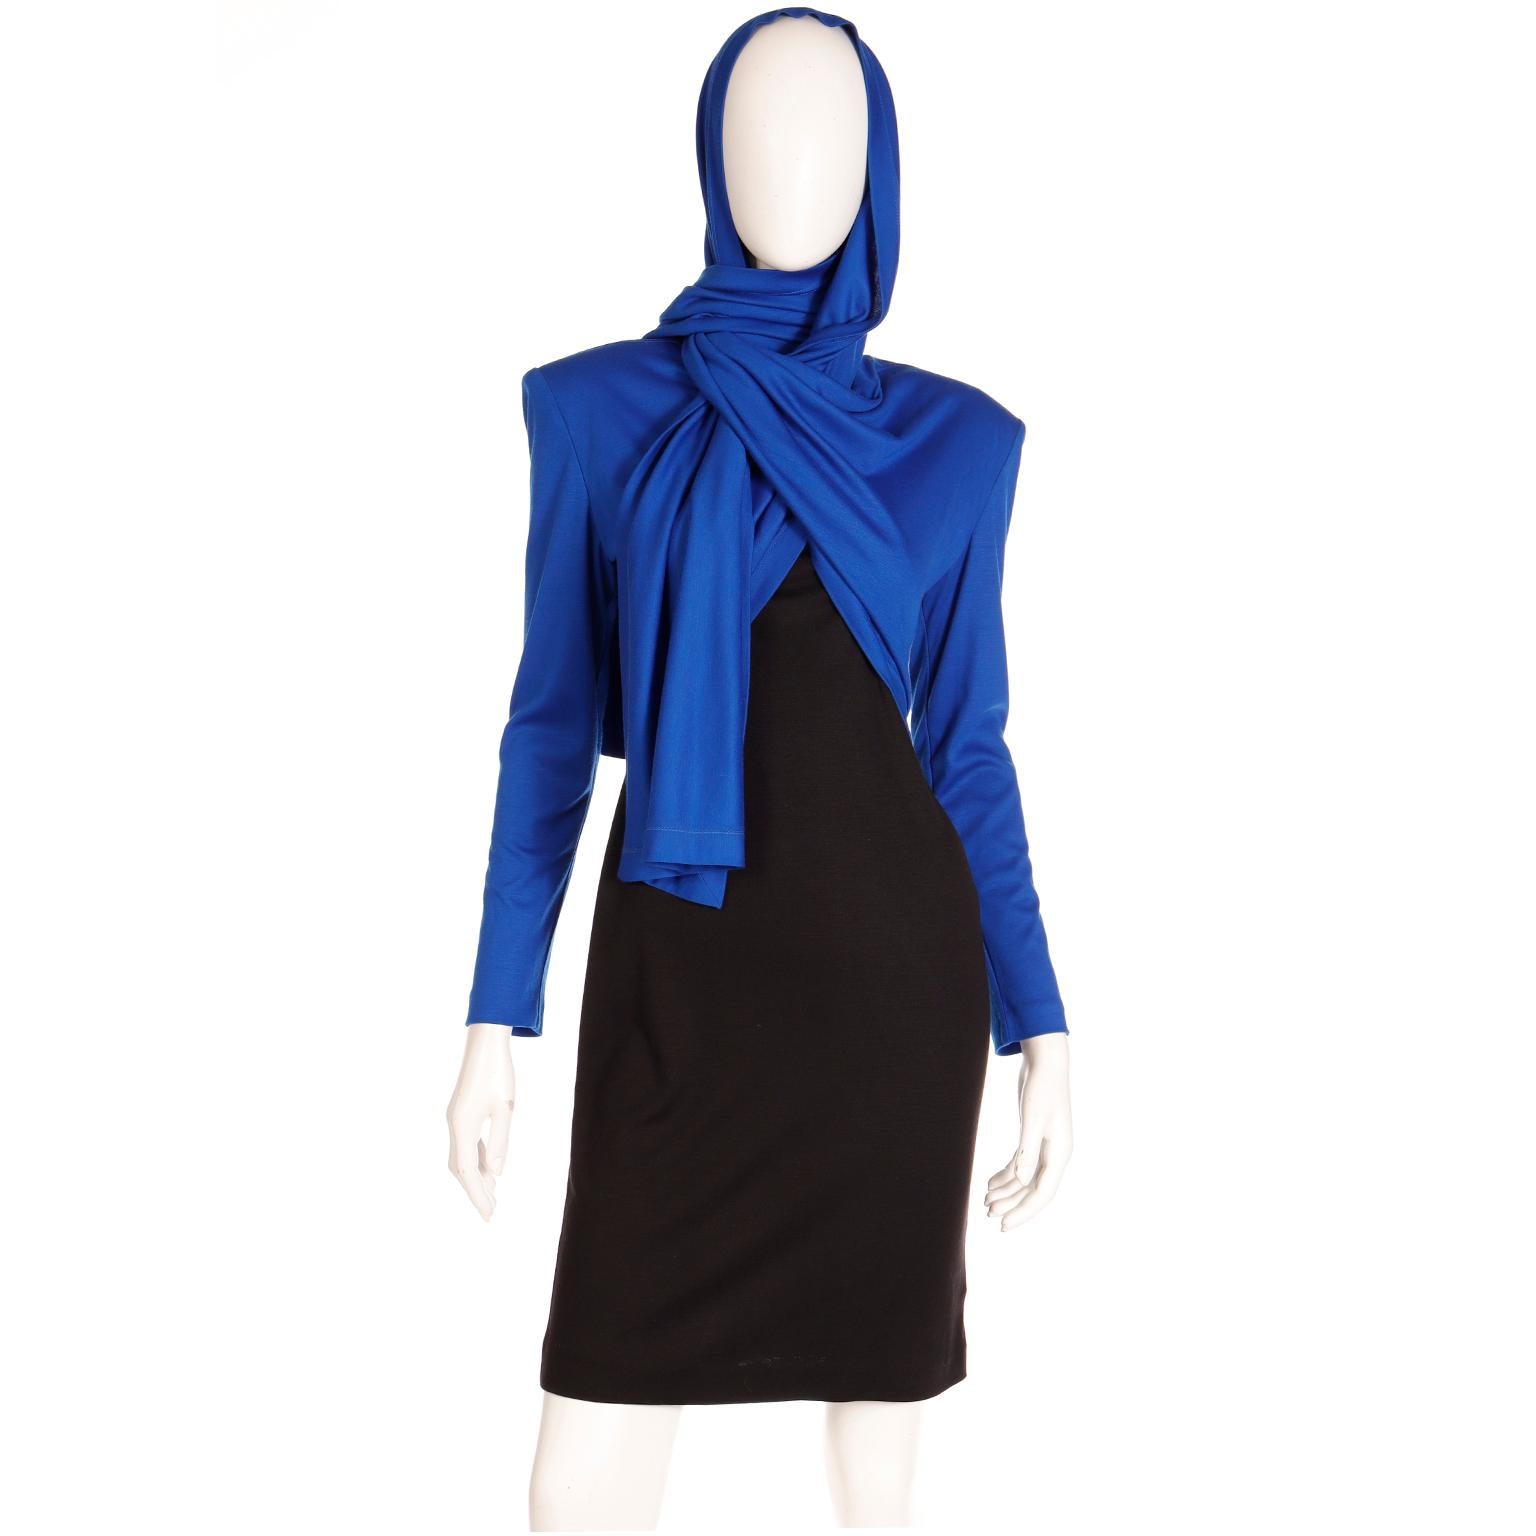 FW 1989 Patrick Kelly Runway Dress in Blue & Black Knit with Head Scarf  For Sale 4